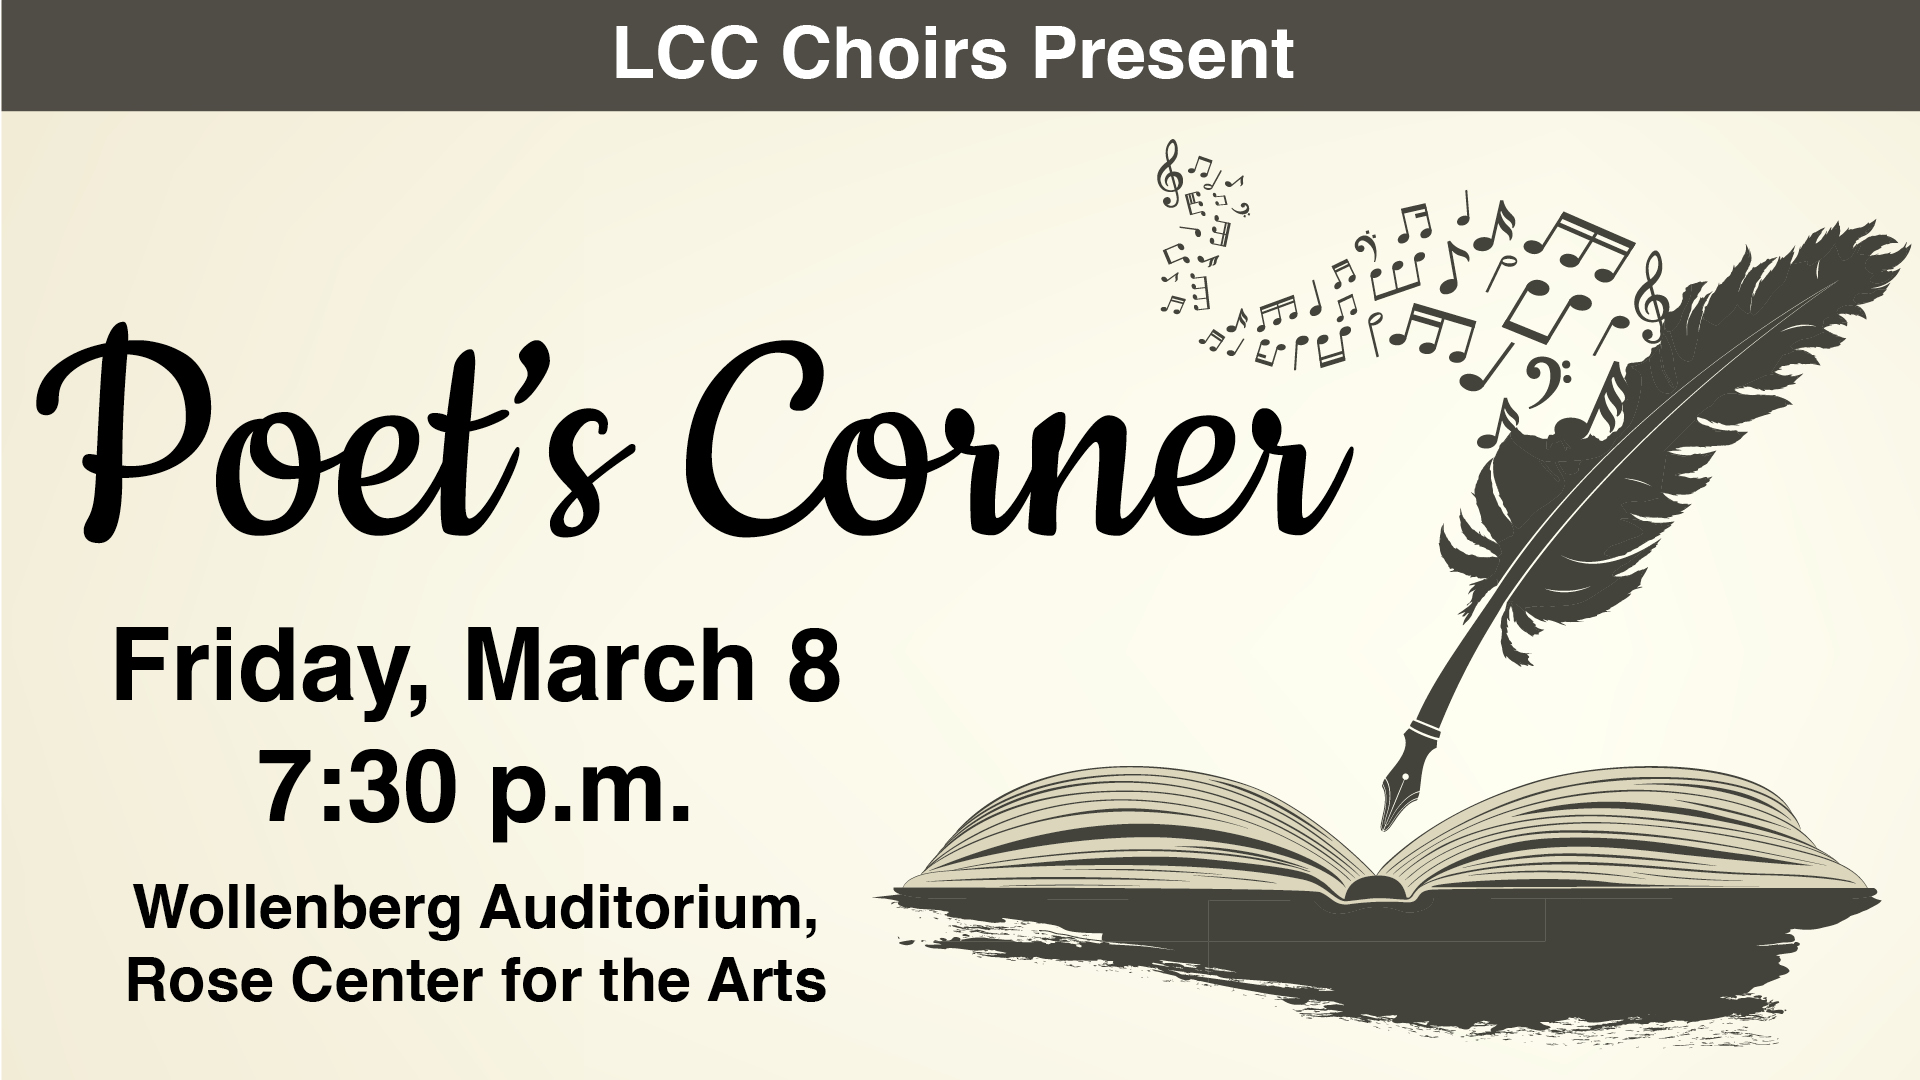 LCC Choir Presents "Poets Corner" March 8th at 7:30pm in the Rose Center for the arts Wollenberg Auditorium